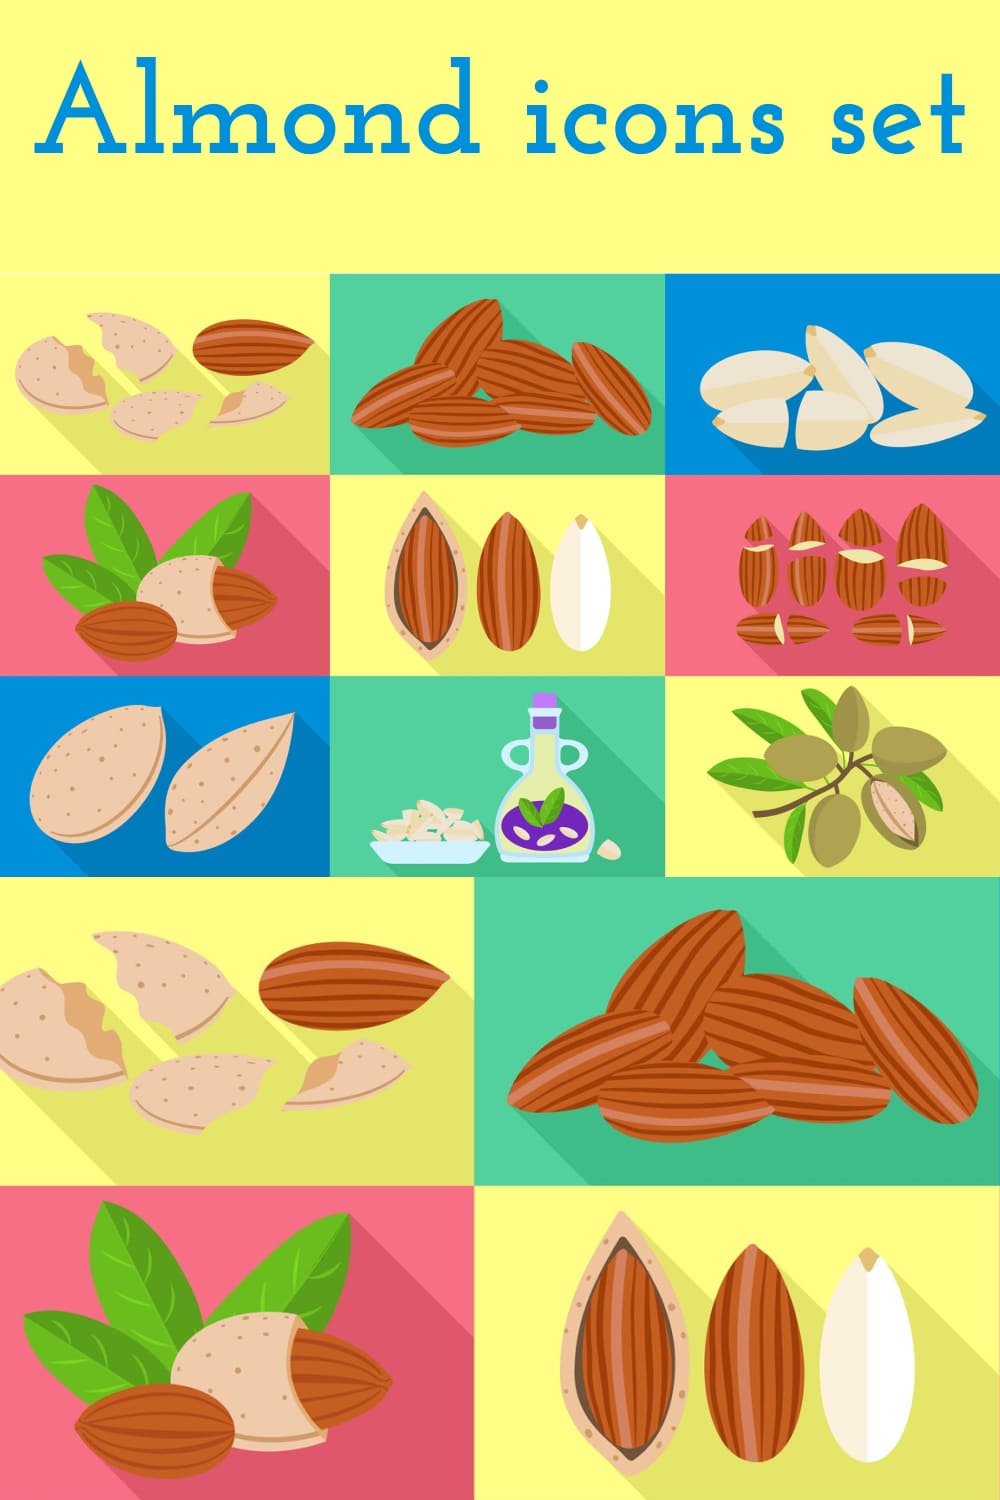 Images of almonds and almond products.